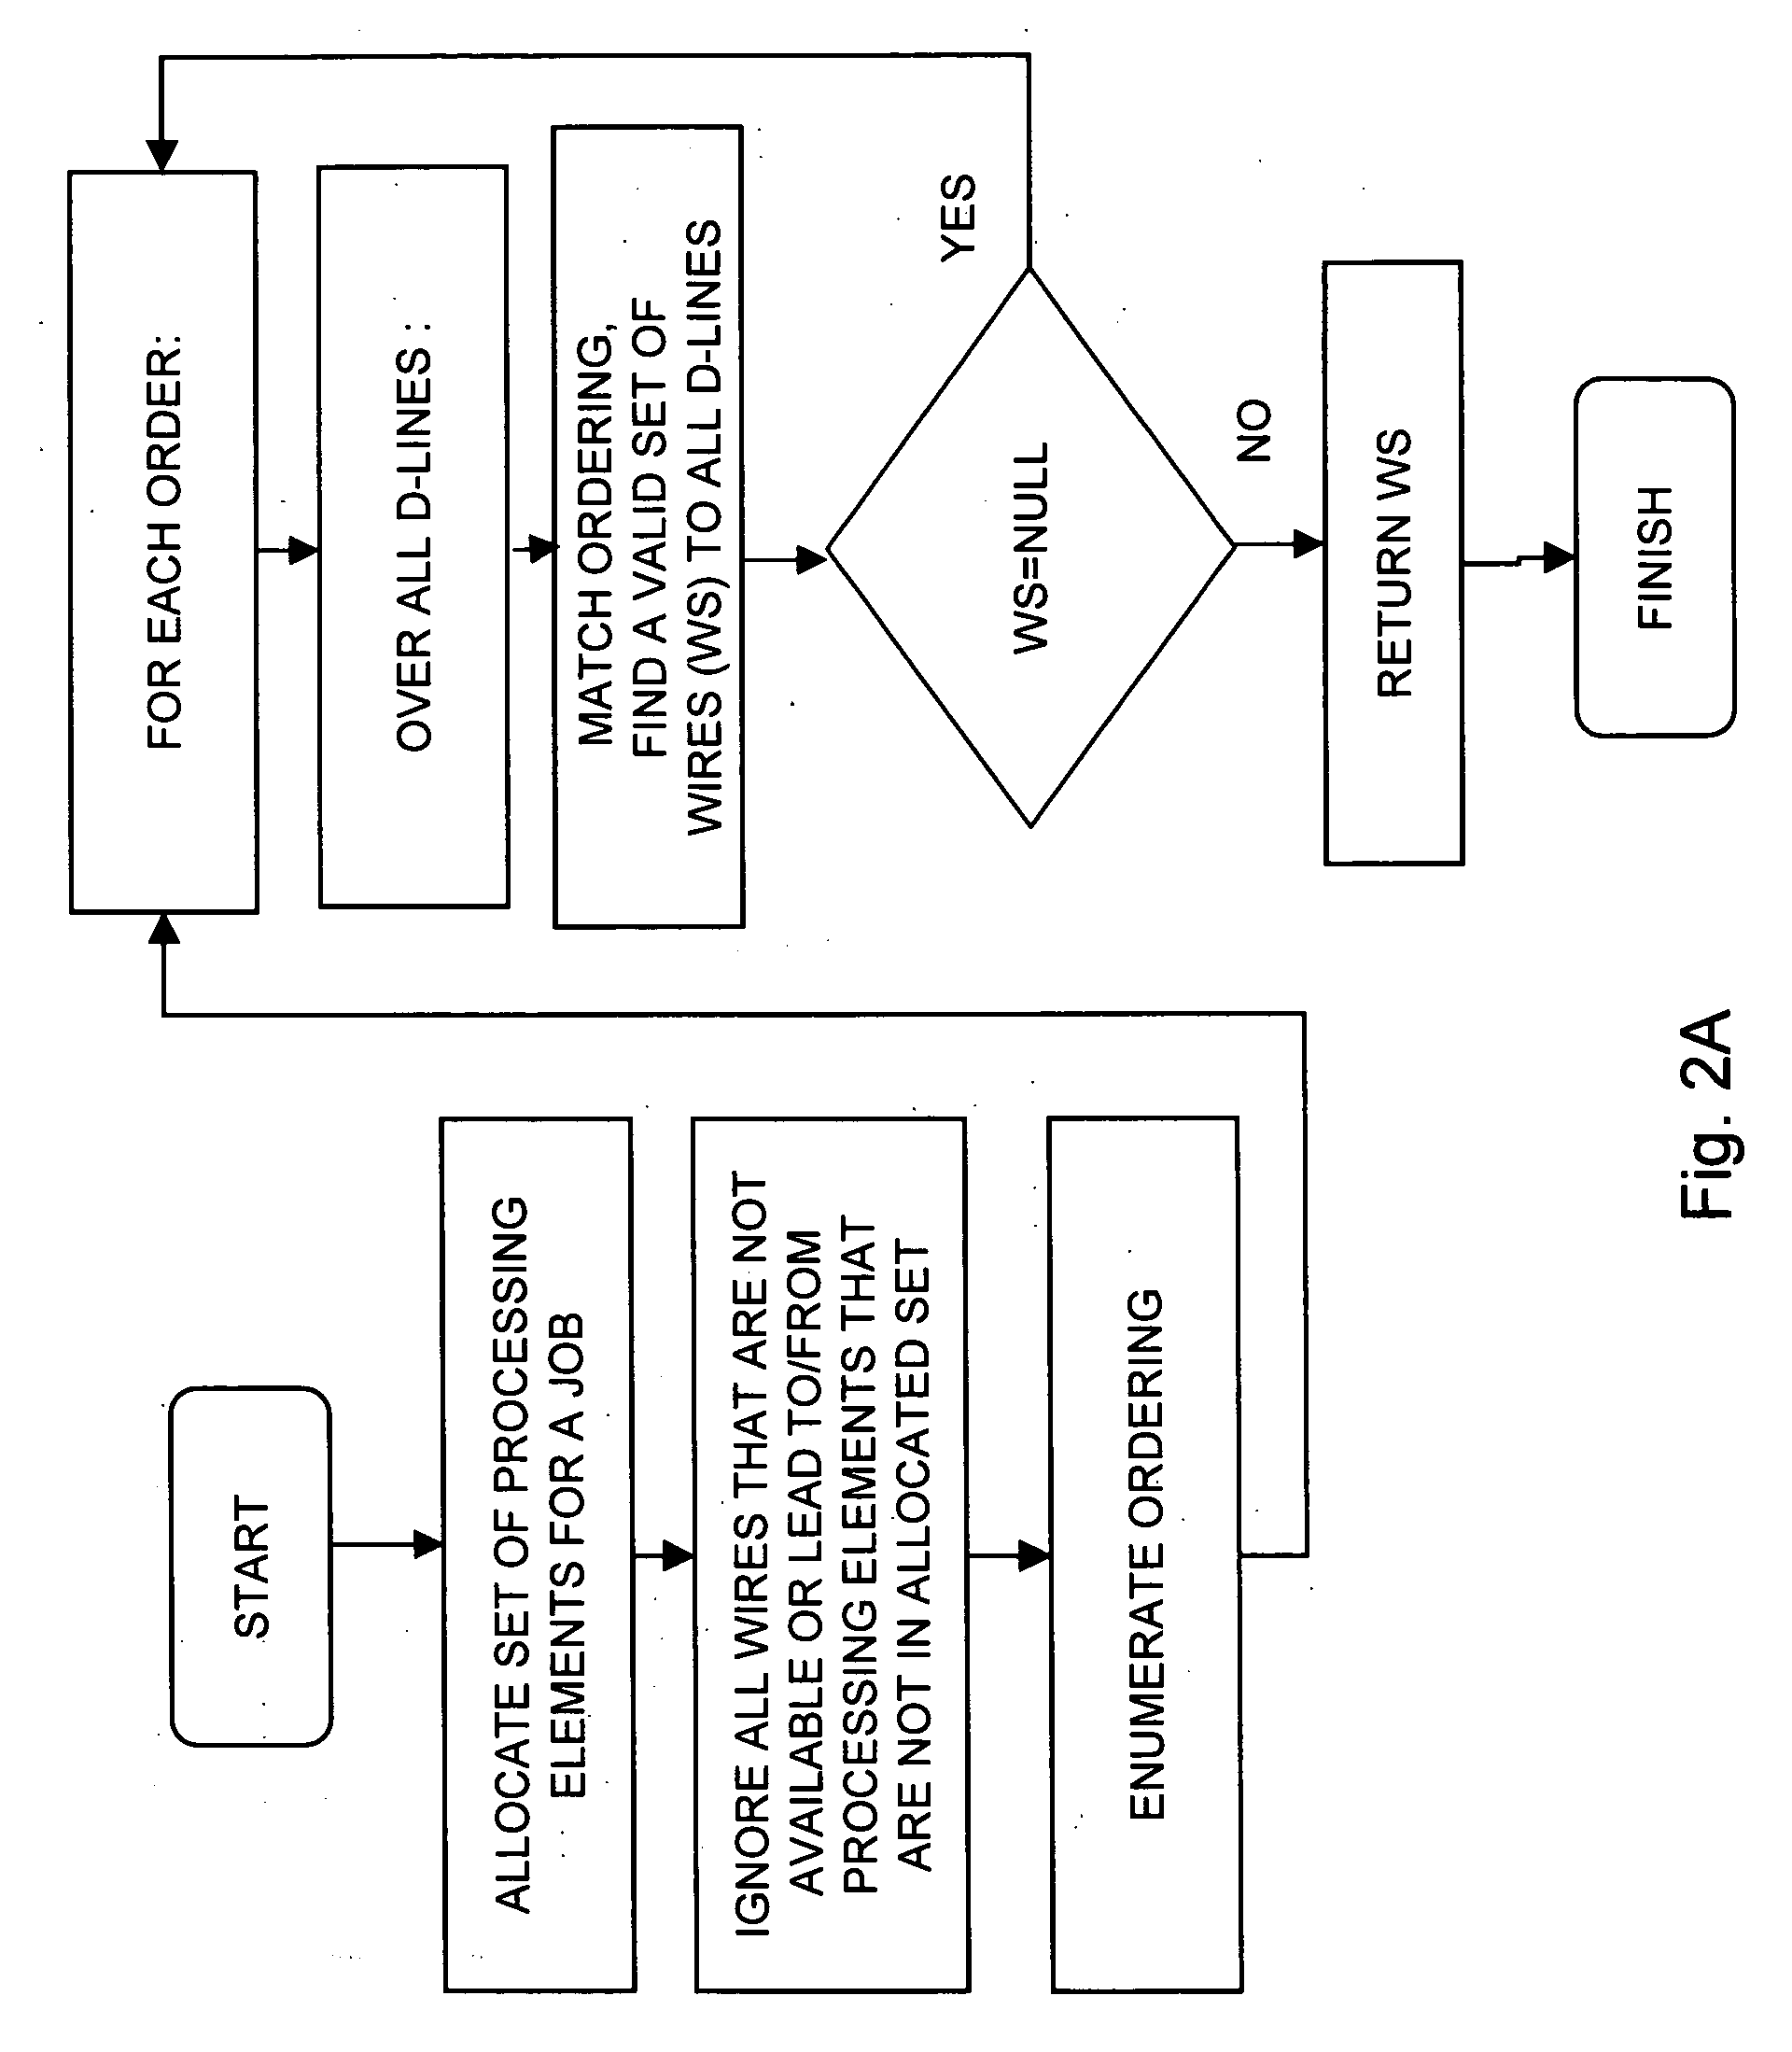 Method for wiring allocation and switch configuration in a multiprocessor environment